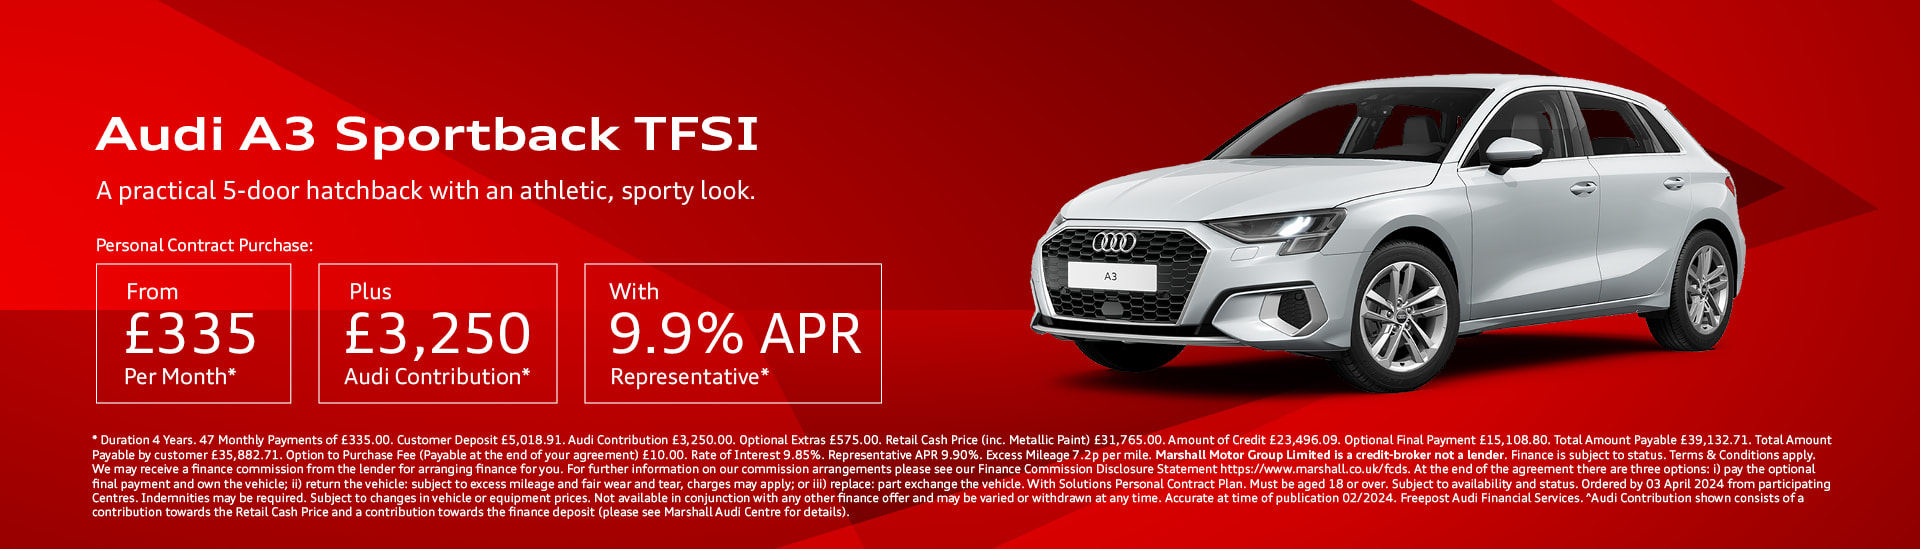 Audi A3 Sportback Personal Contract Purchase Offer 